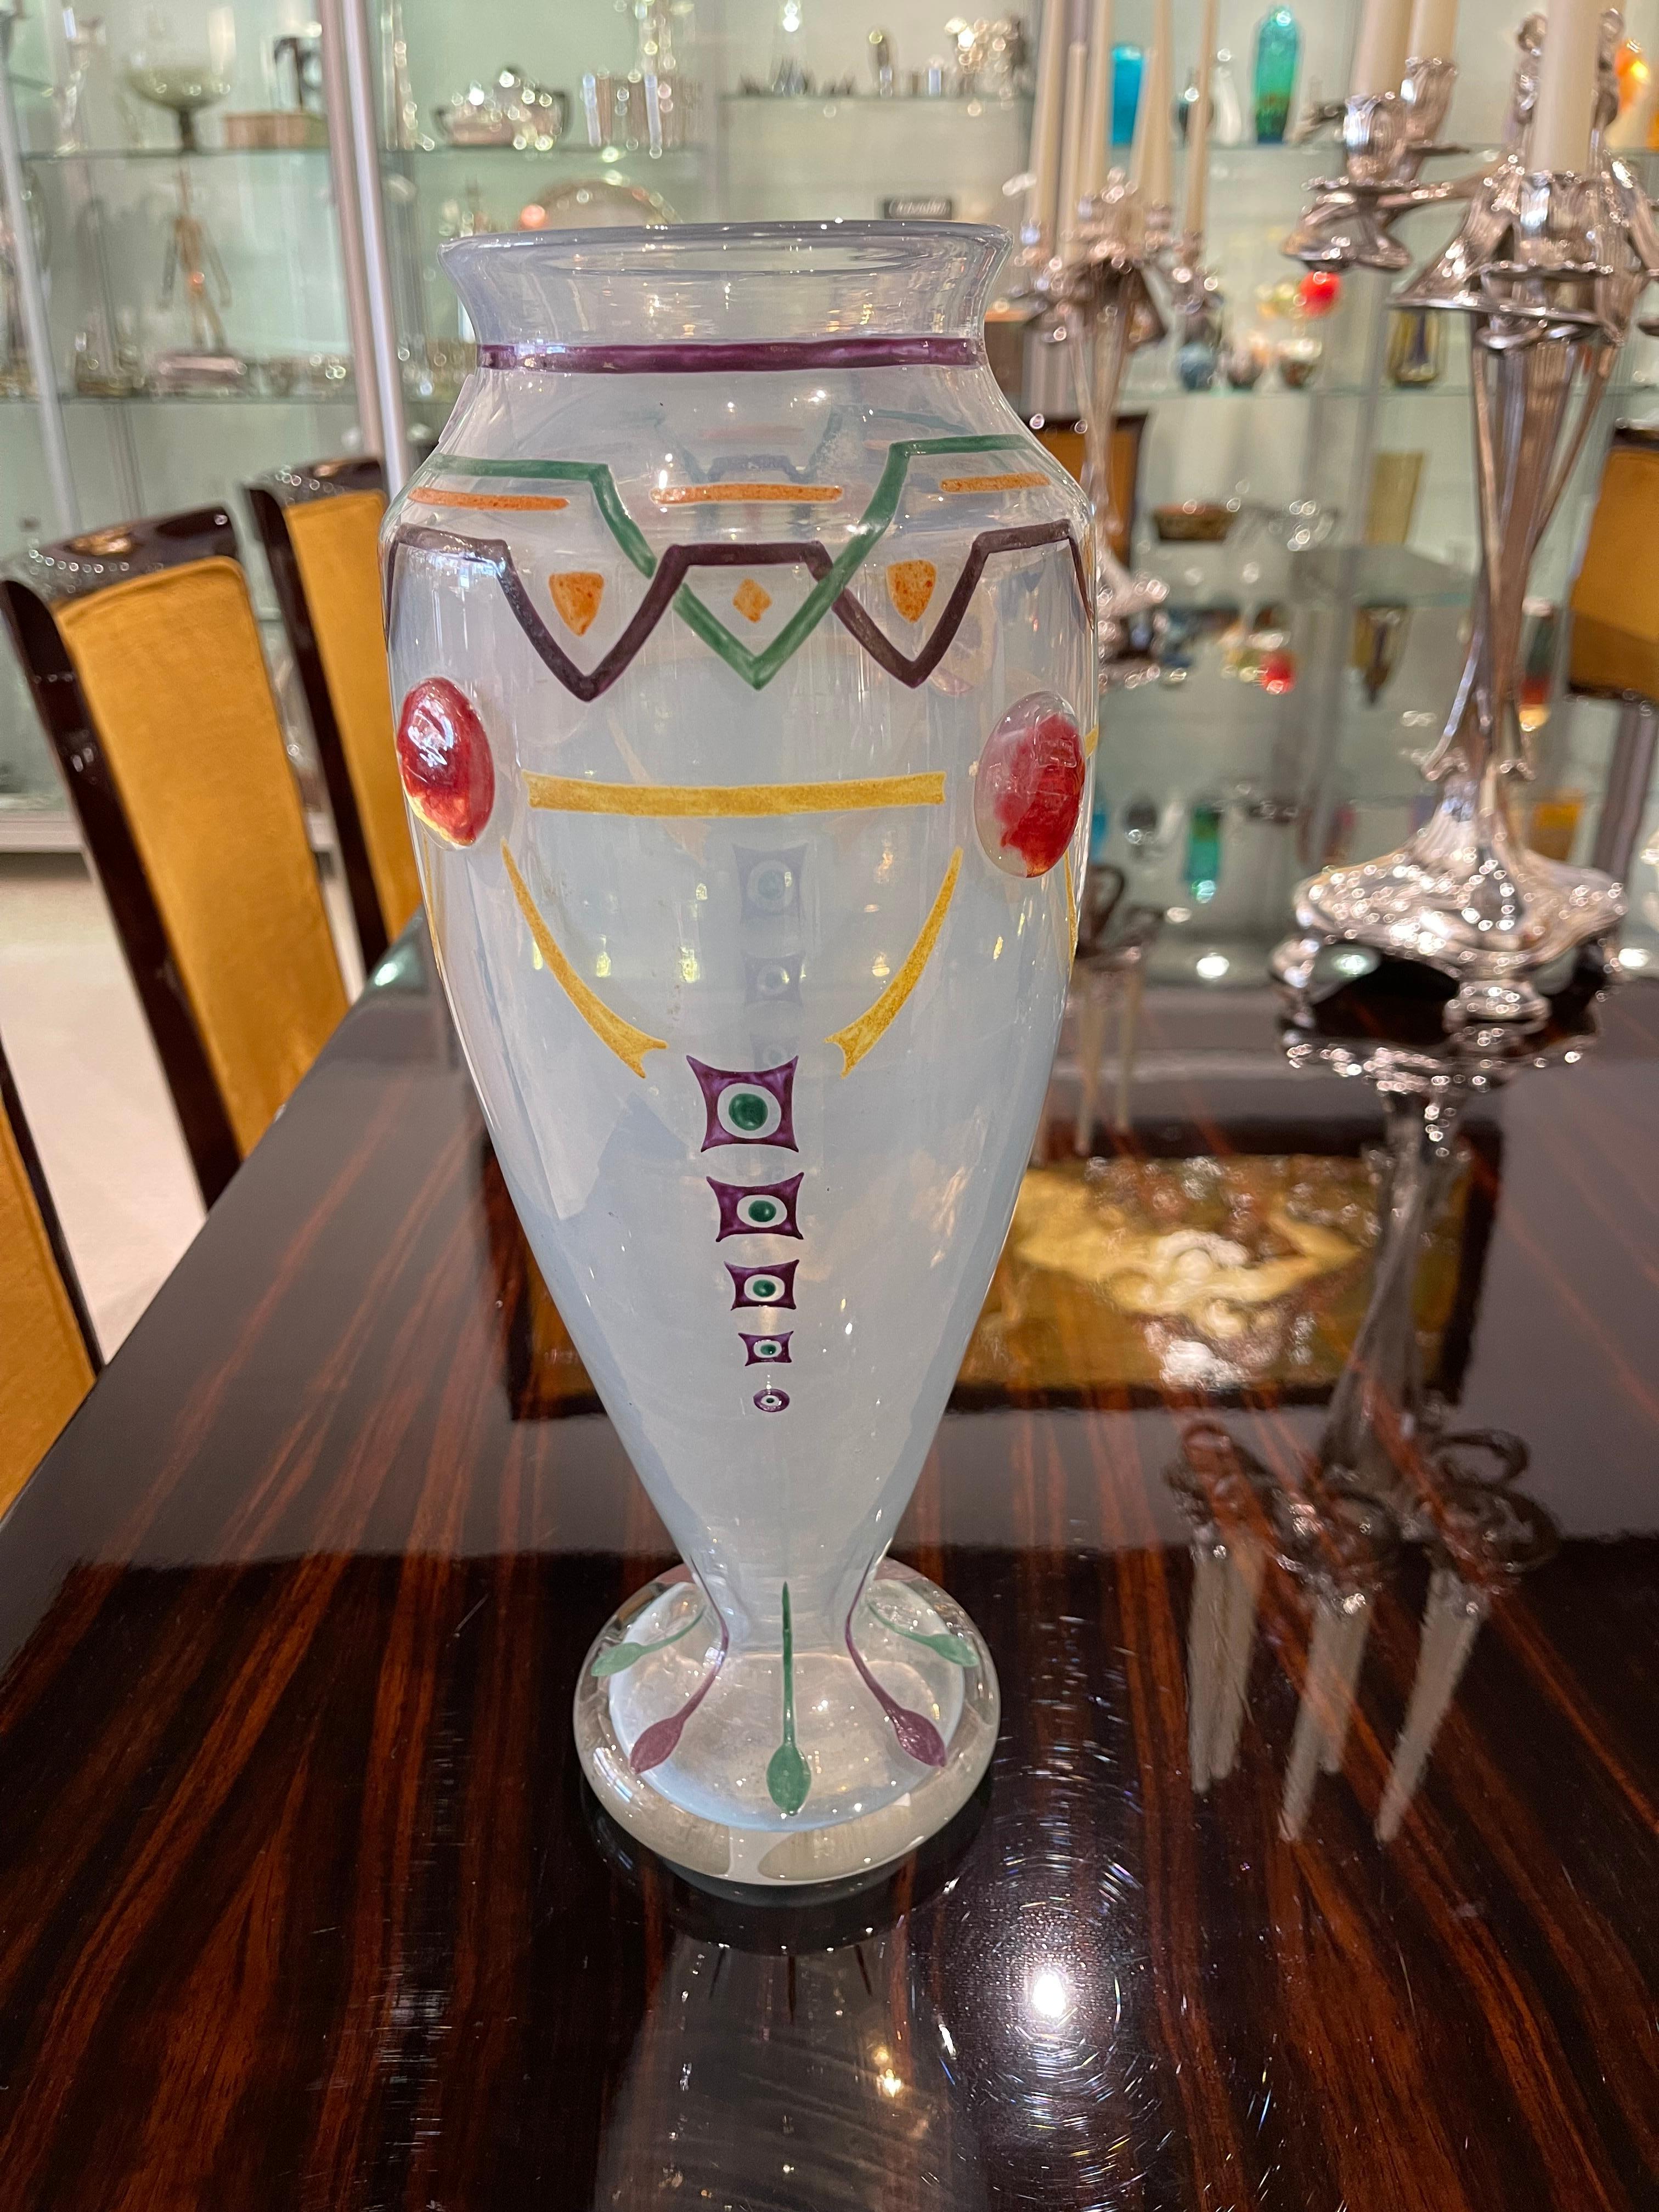 A Rare Art Deco Hand Enameled Opalescent Glass Vase in Orange, Green, Purple colors with Gold Enameled Decor.
Made in France.
Circa: 1920
Signature: Schneider.